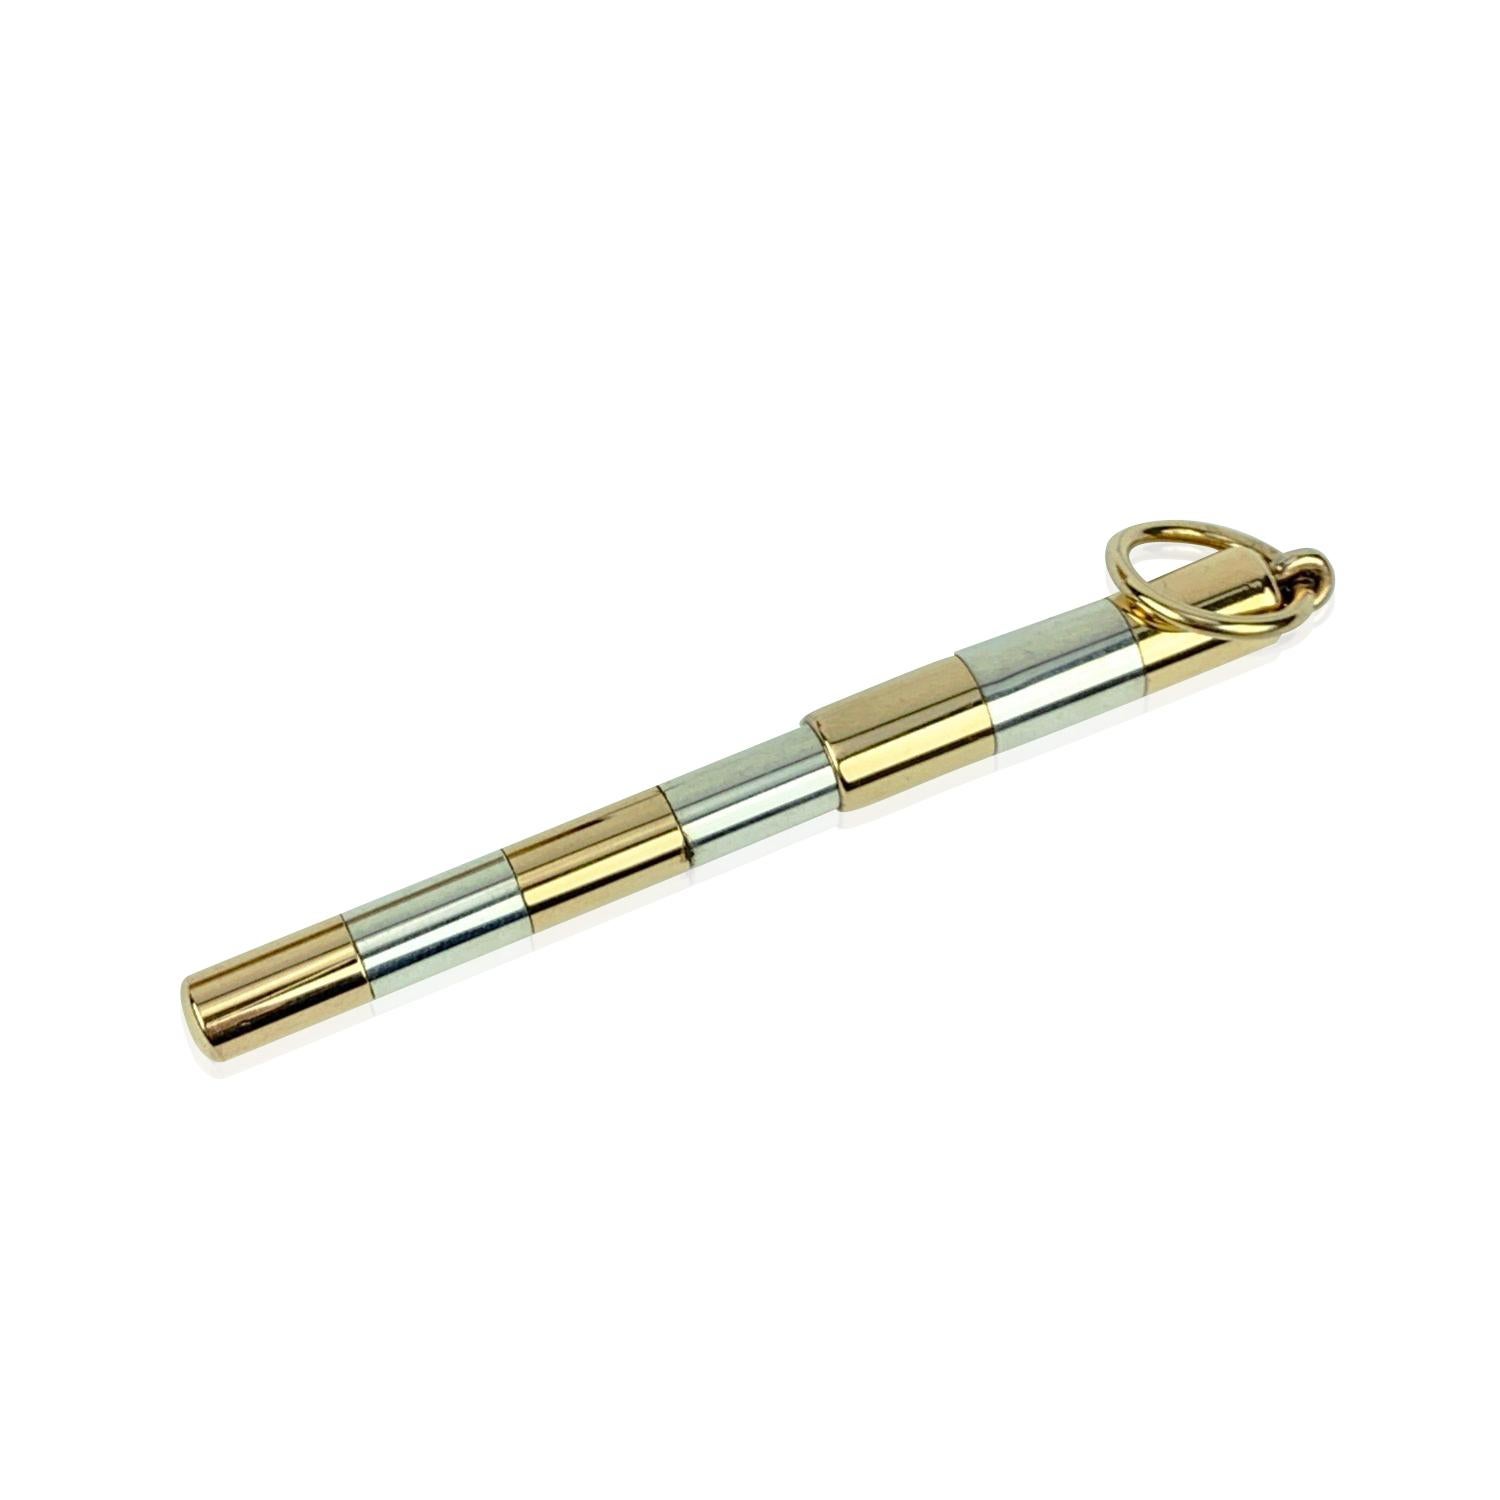 Small vintage ball point pen by Gucci. Made of sterling silver metal with golden details. It features a small ring on the cap that allows you to attach it to a necklace or key ring to always have the pen with you. Total length: 2.75 inches - 7 cm.